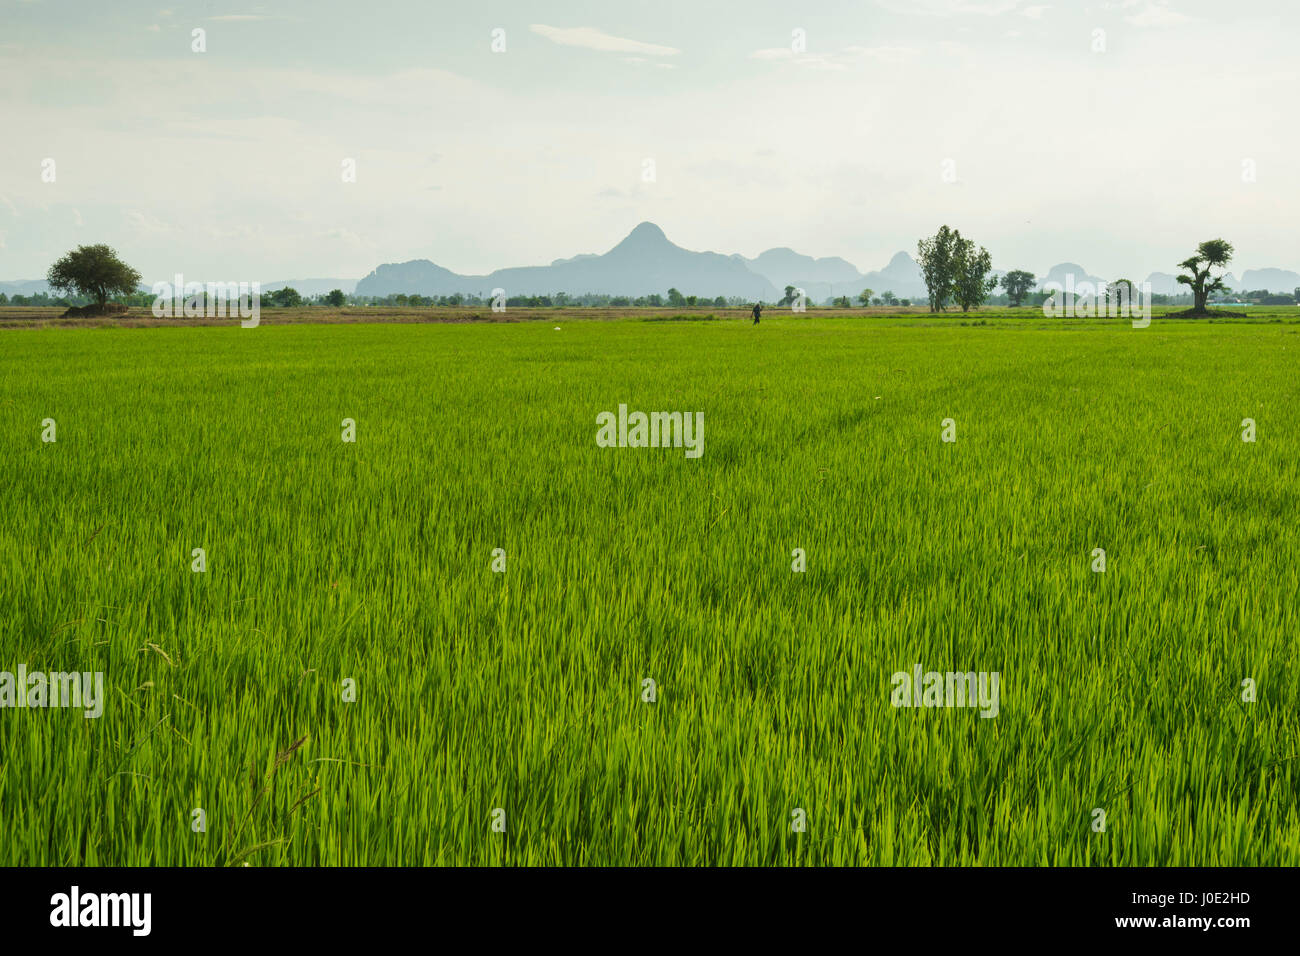 Rice grass in a big rice paddy in spring time before bearing grains in front of Iko Mountain on the background, Petchaburi, Thailand Stock Photo